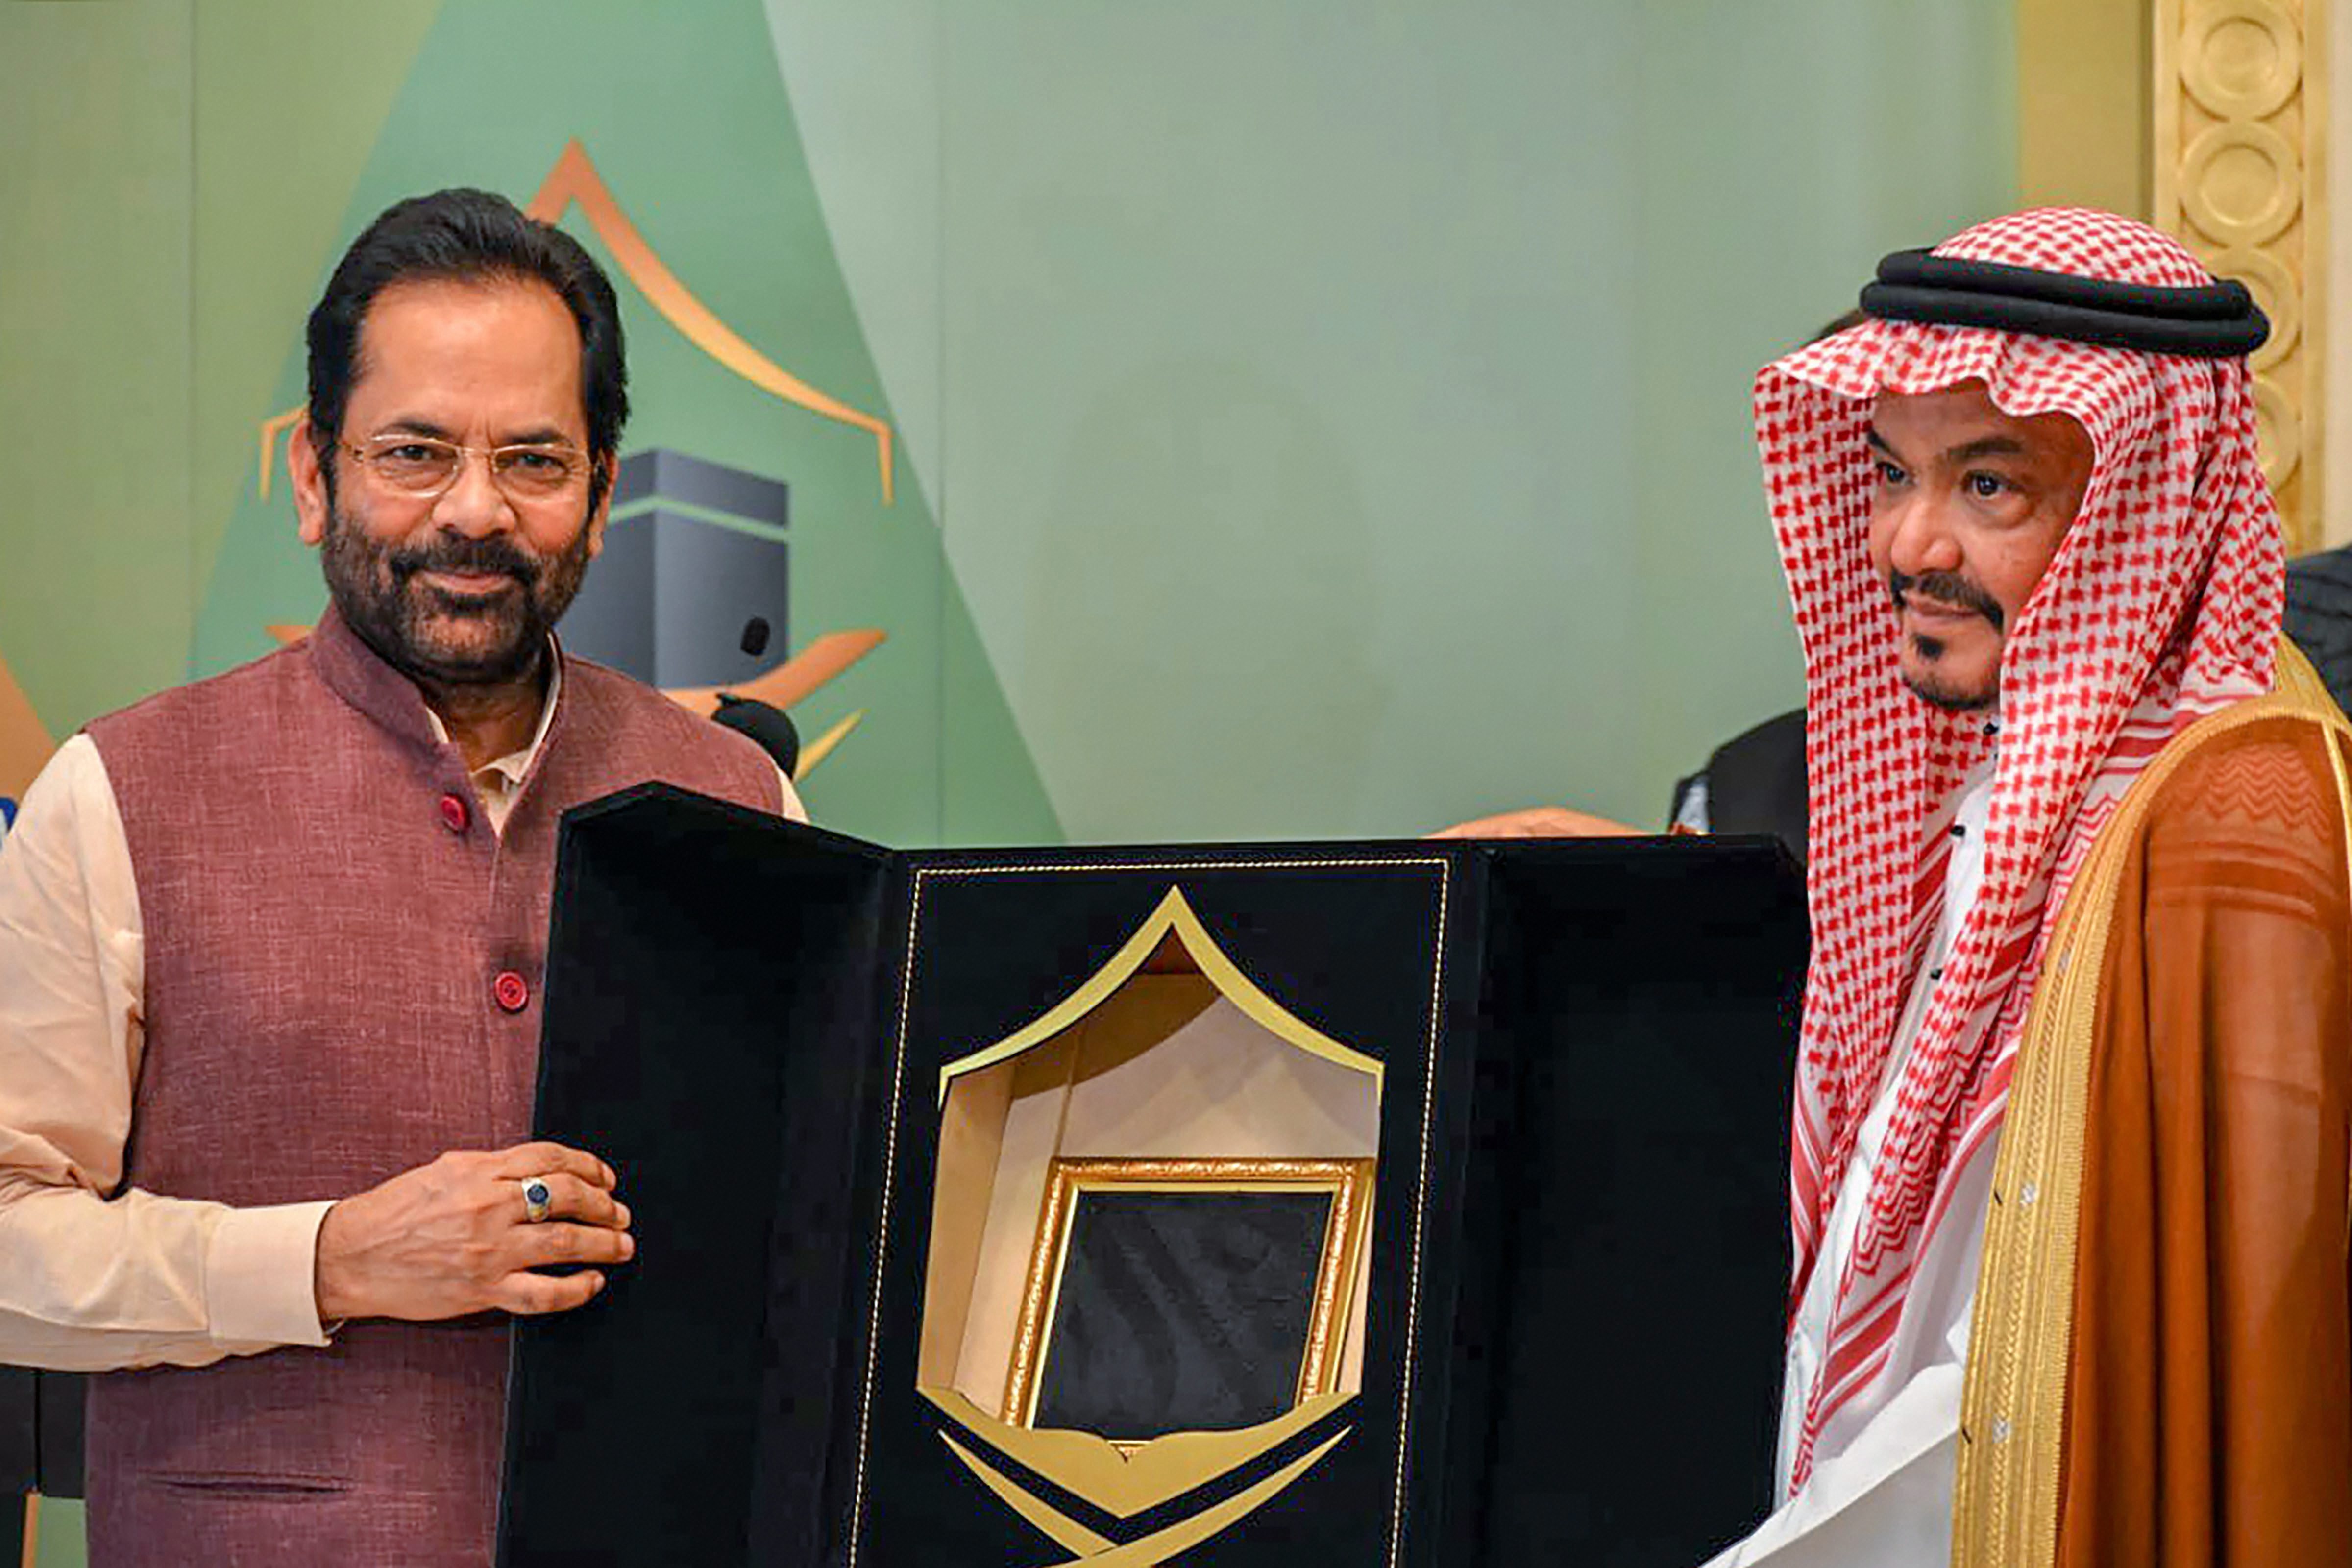 Minister for Minority Affairs Mukhtar Abbas Naqvi with Minister of Haj and Umrah Dr. Mohammad Saleh Bin Taher Benten after signing a bilateral annual Haj 2019 agreement between India and Saudi Arabia, in Jeddah - PTI